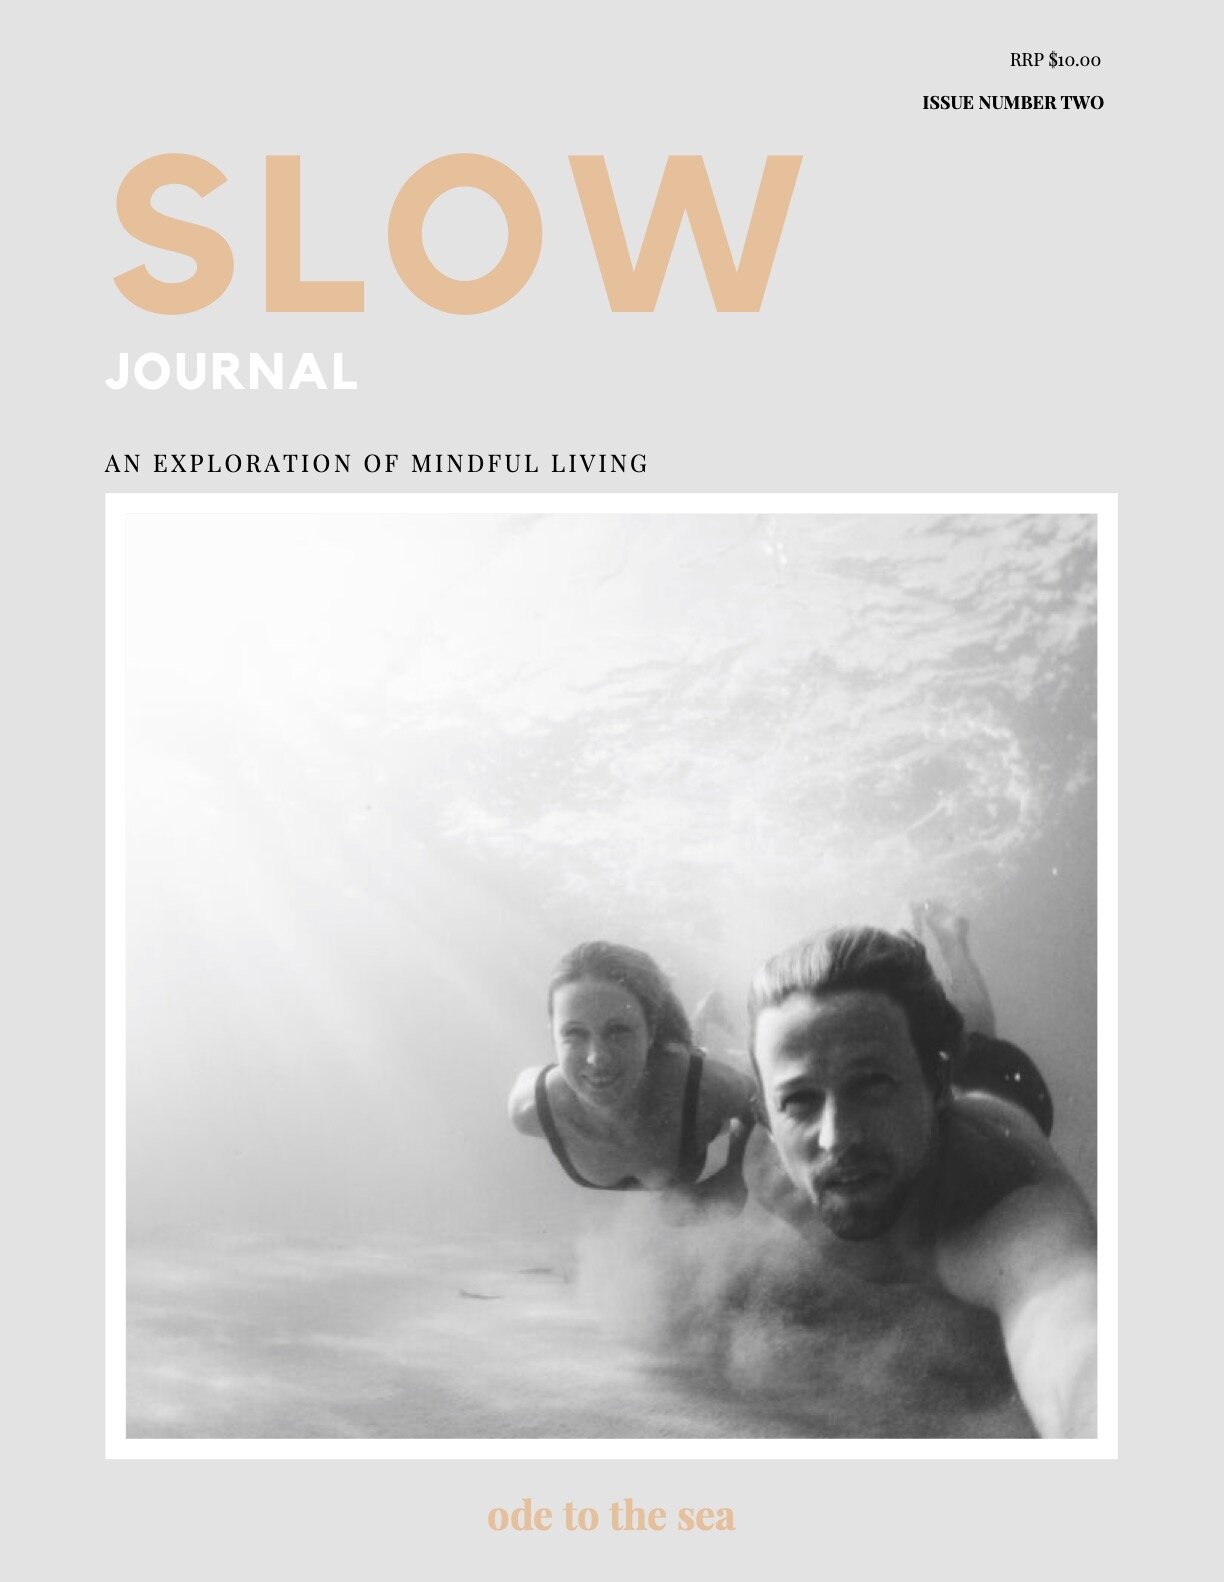 Slow mag cover.jpg